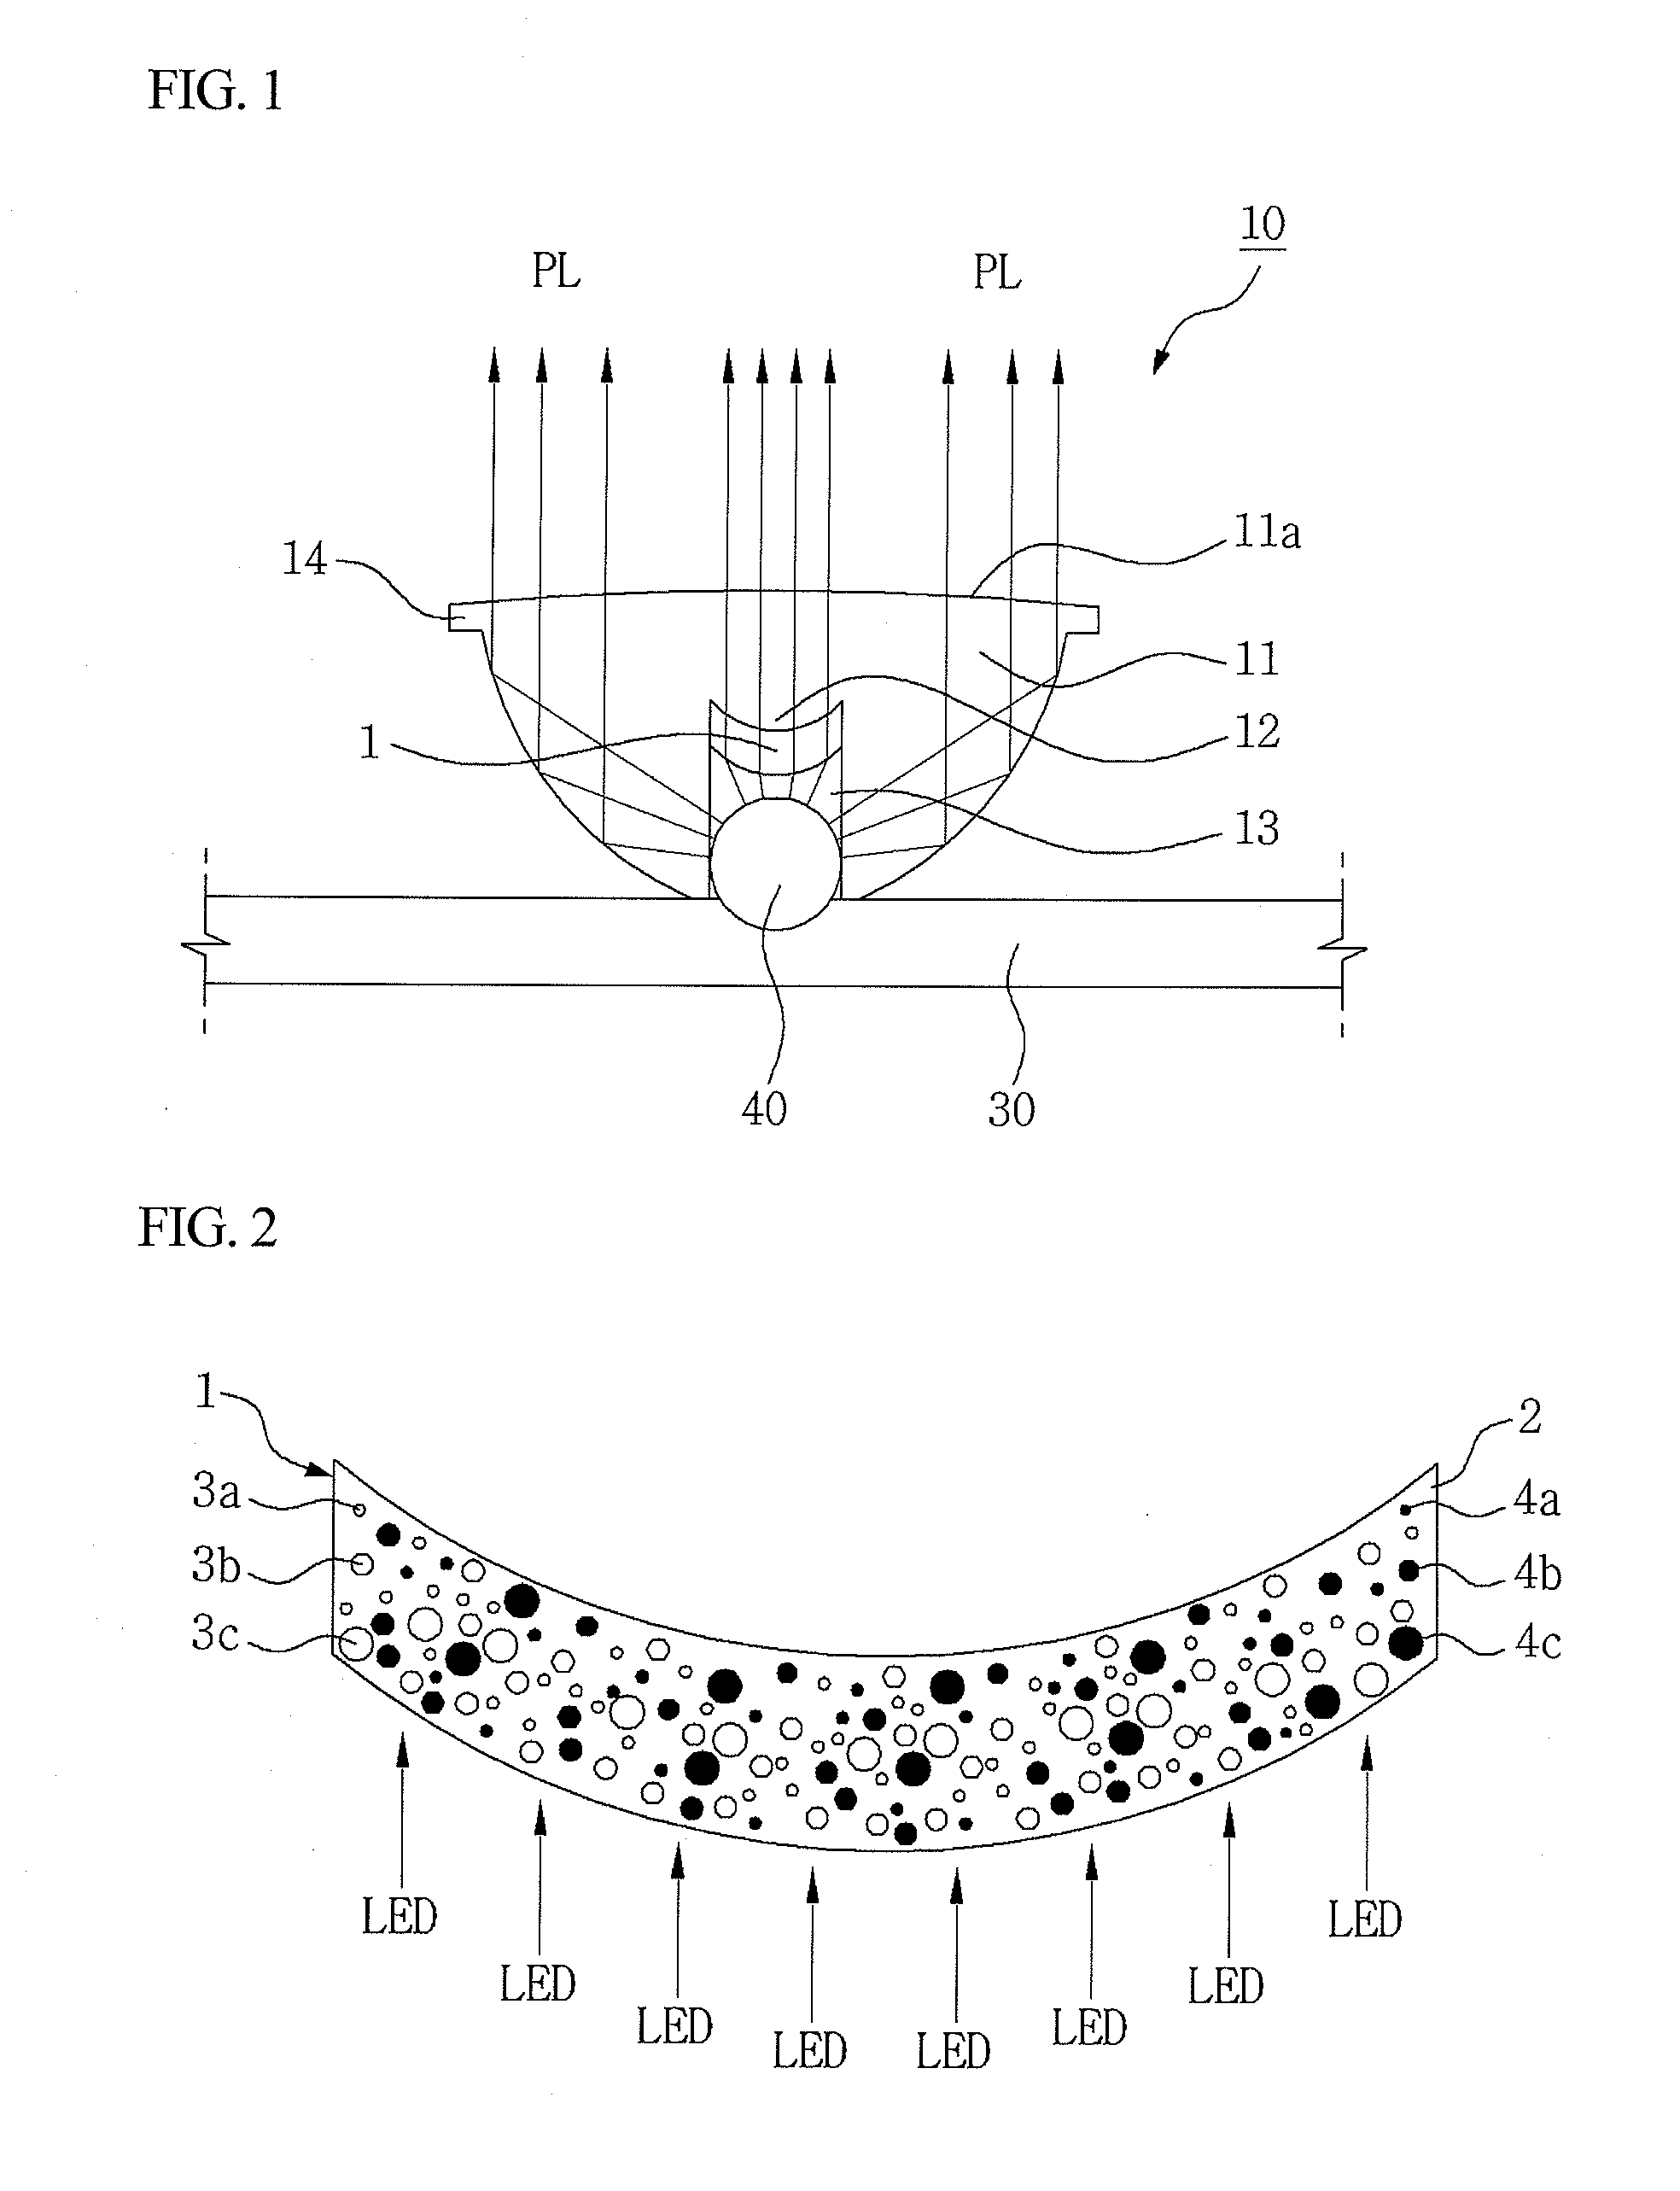 LED light converting resin composition and LED member using the same